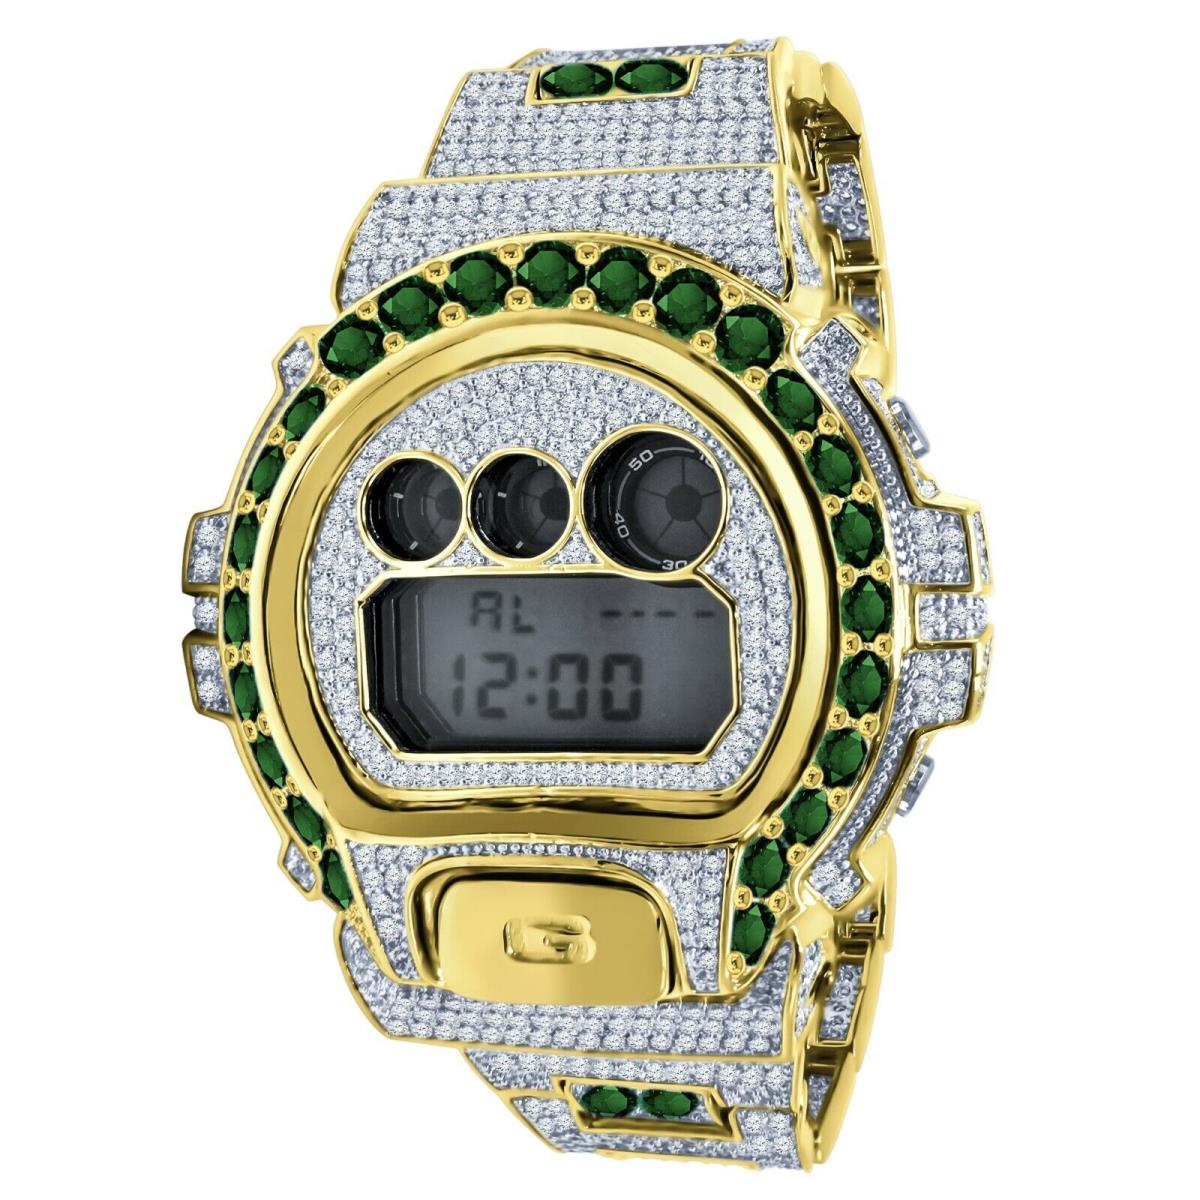 Icy Green Emerald Solitaire On Yellow Gold Finish Casio G-shock DW-6900 Watch